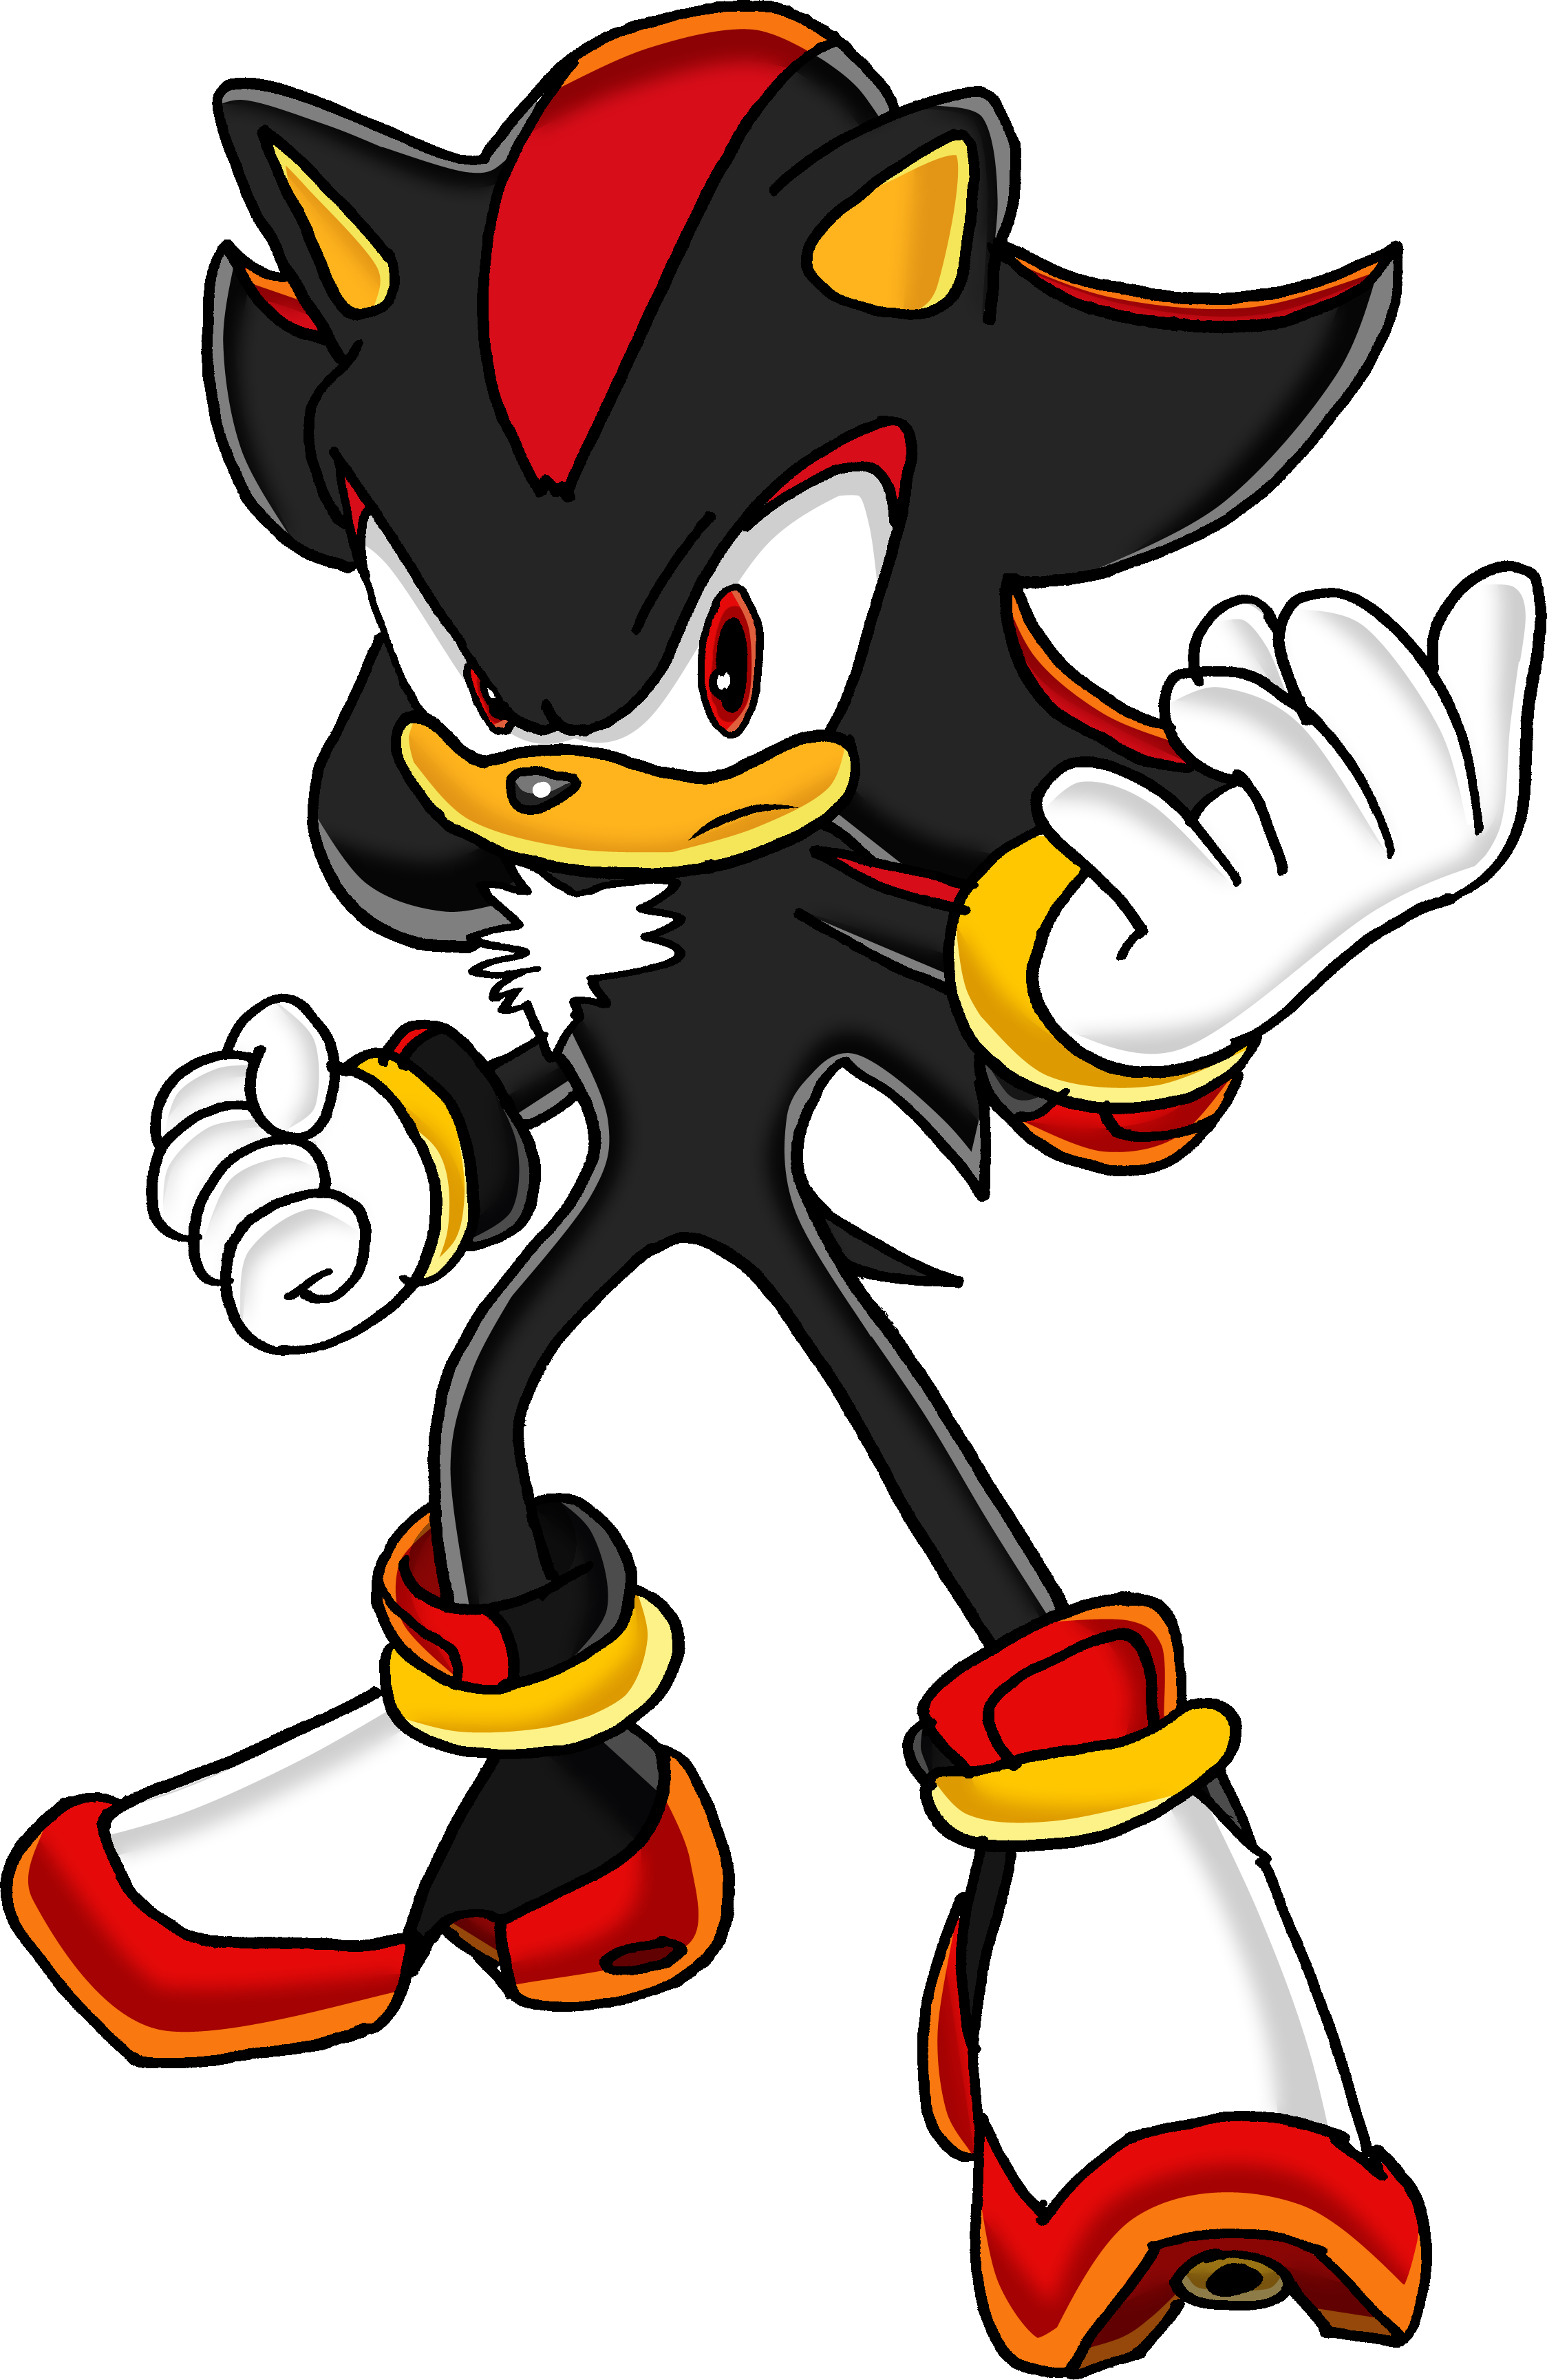 Shadow_The_Hedgehog_png